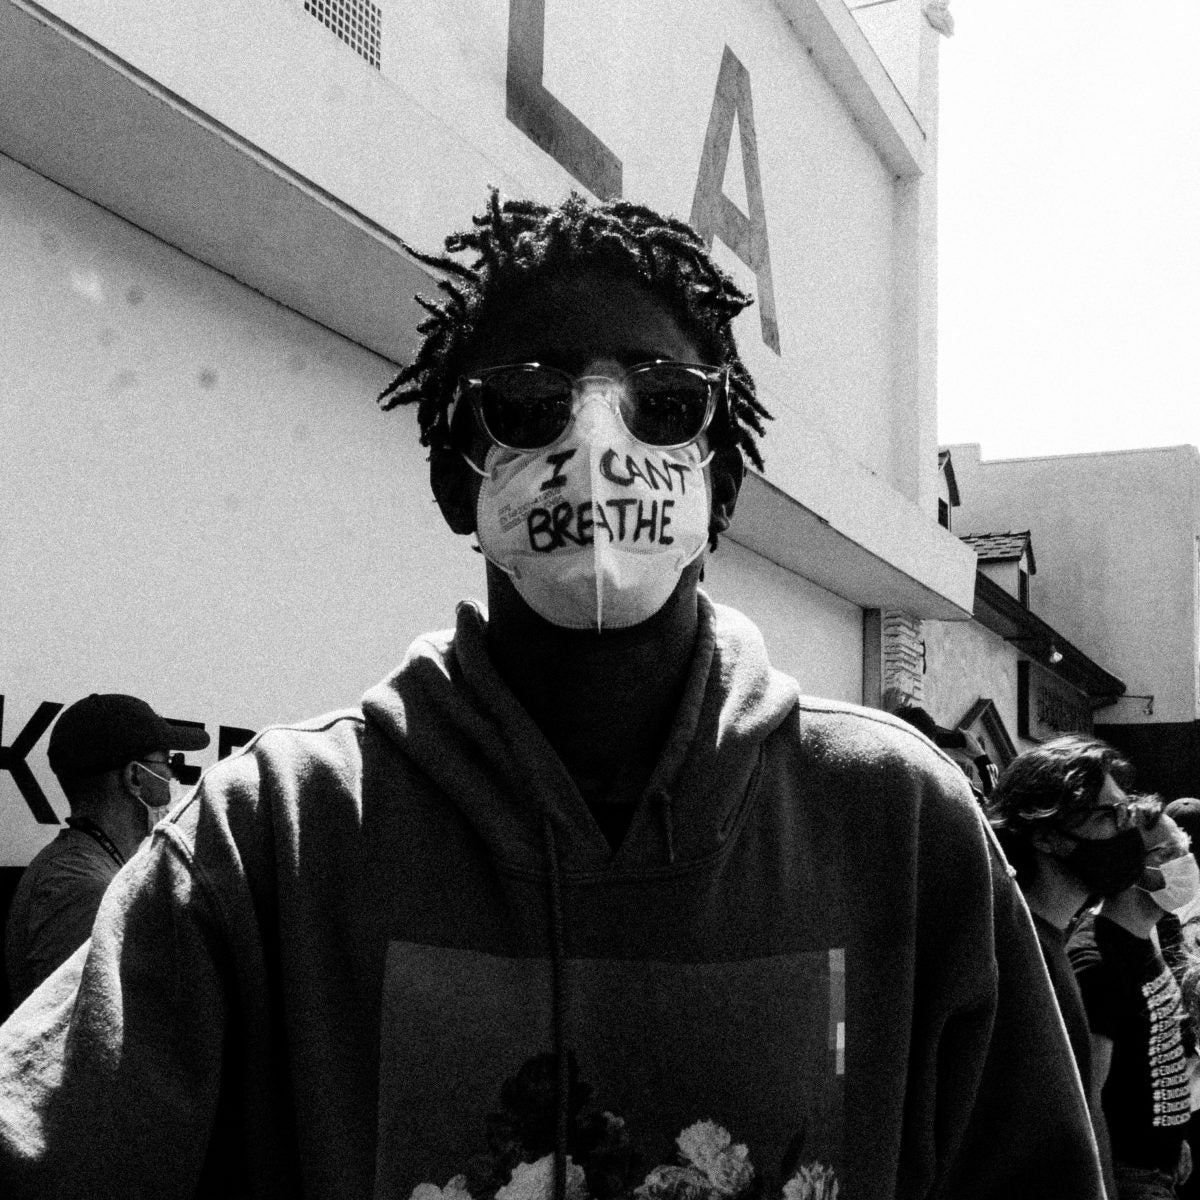 Righteous Rage: Los Angeles Photographer Turns Lens To Social Injustice